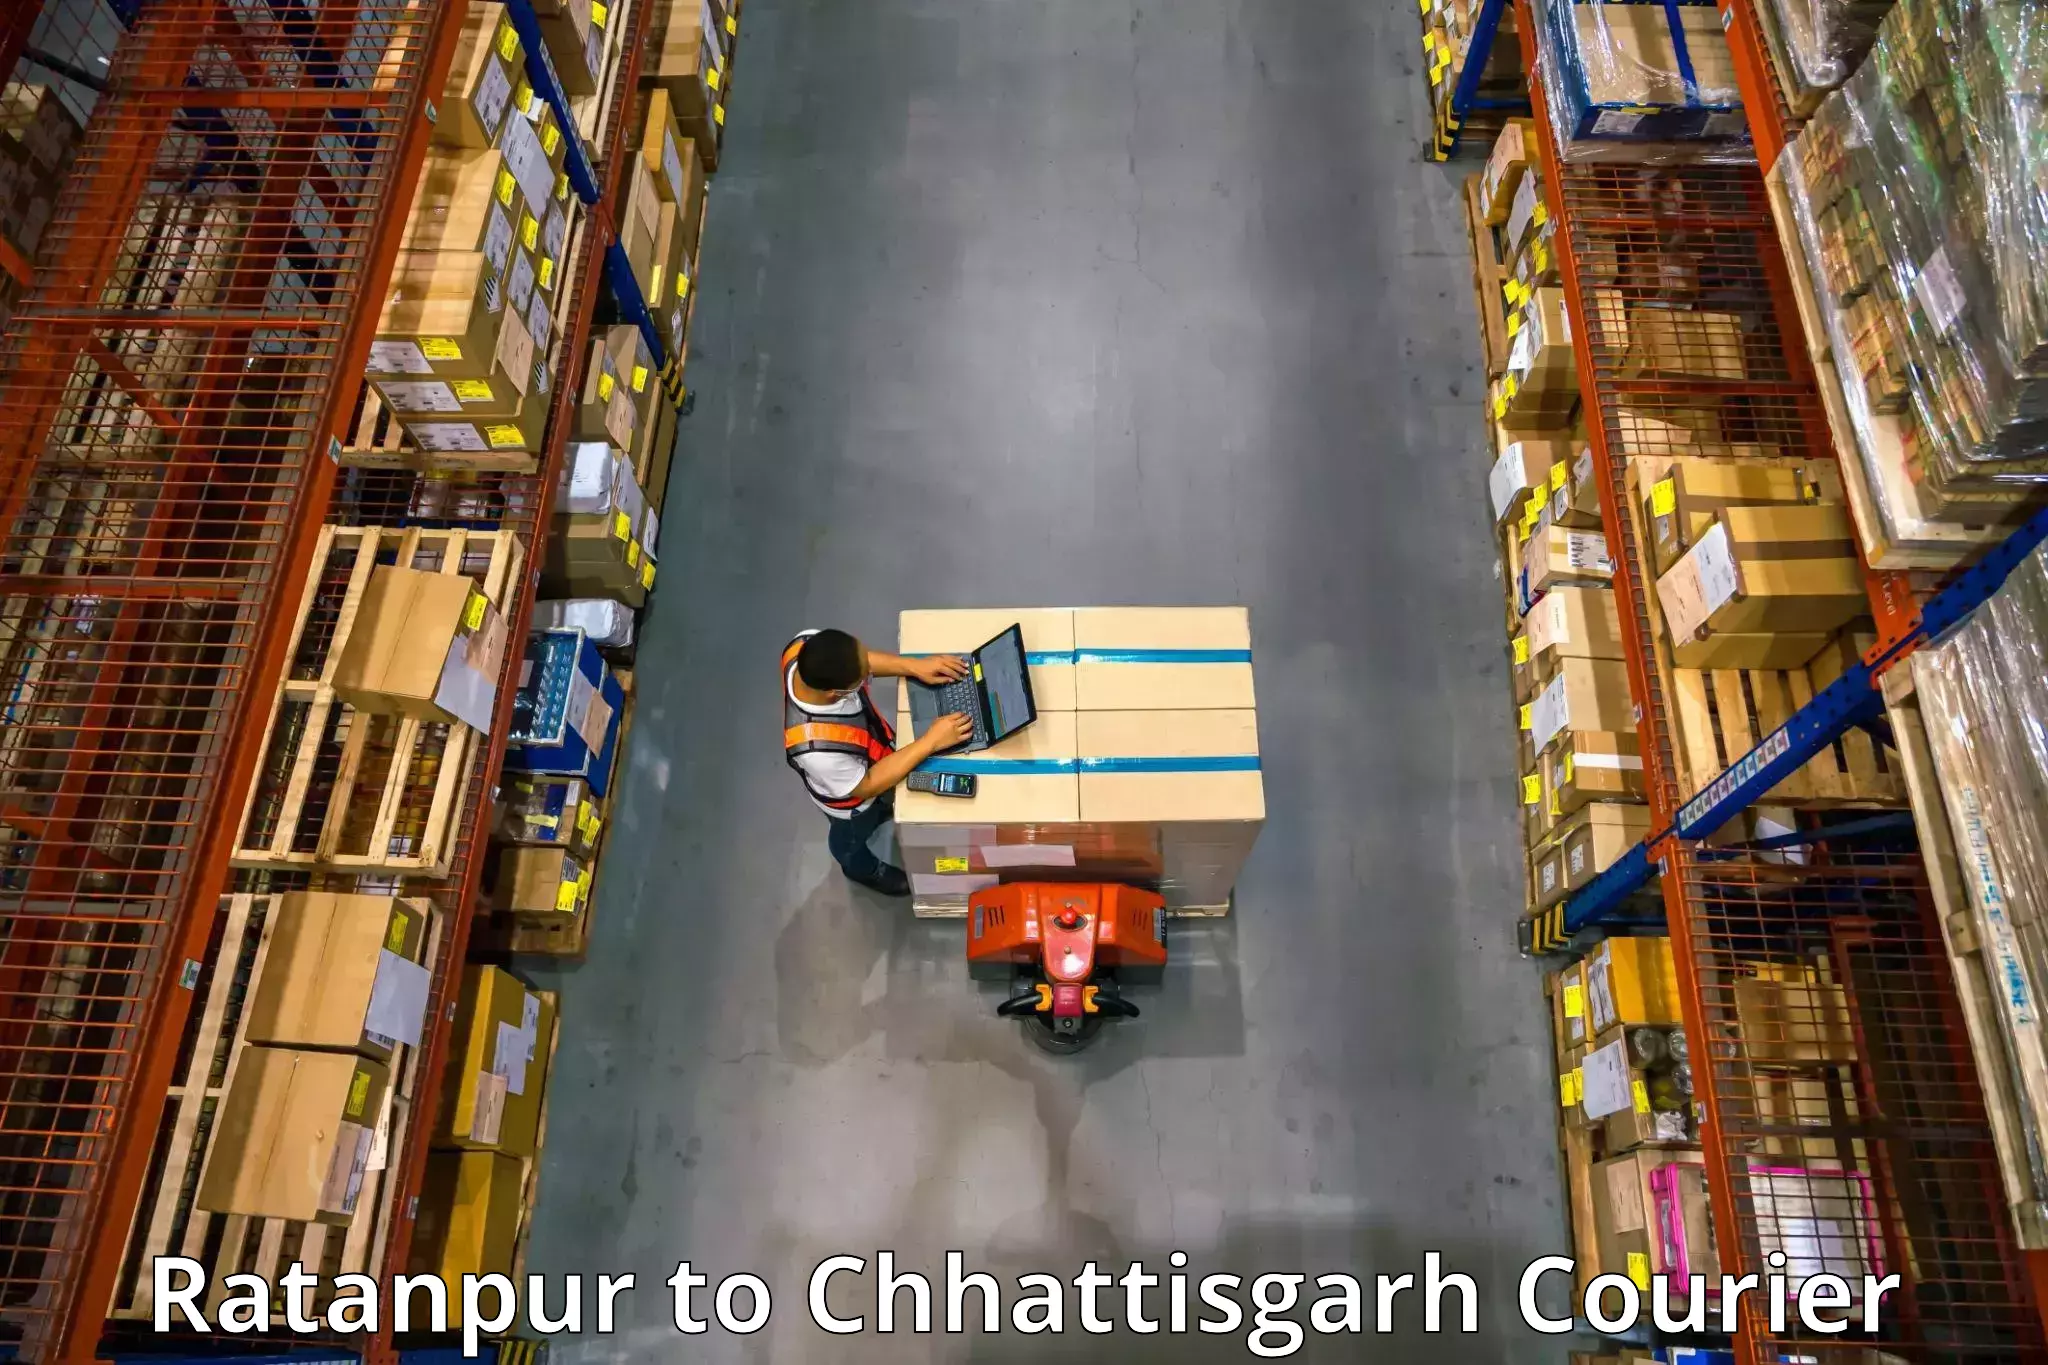 Furniture delivery service Ratanpur to Bilaspur